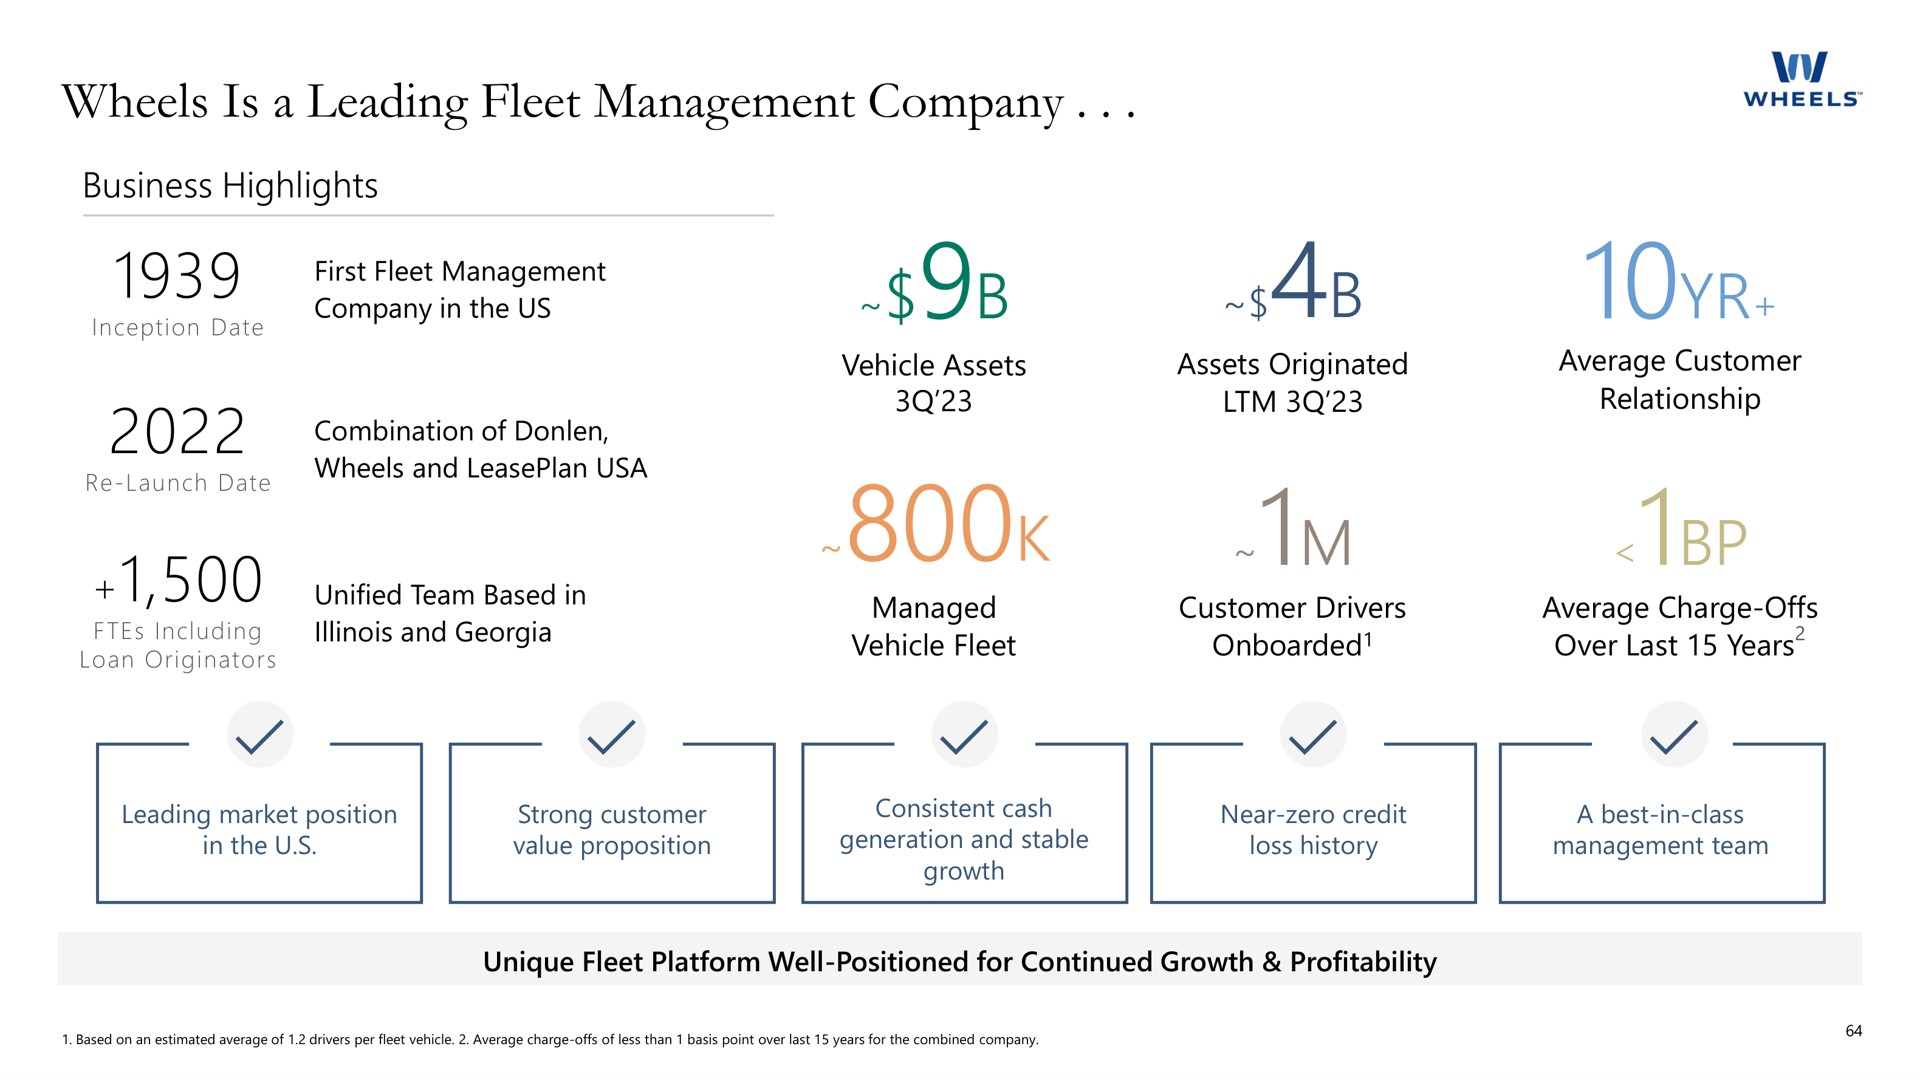 wheels is a leading fleet management company | Apollo Global Management